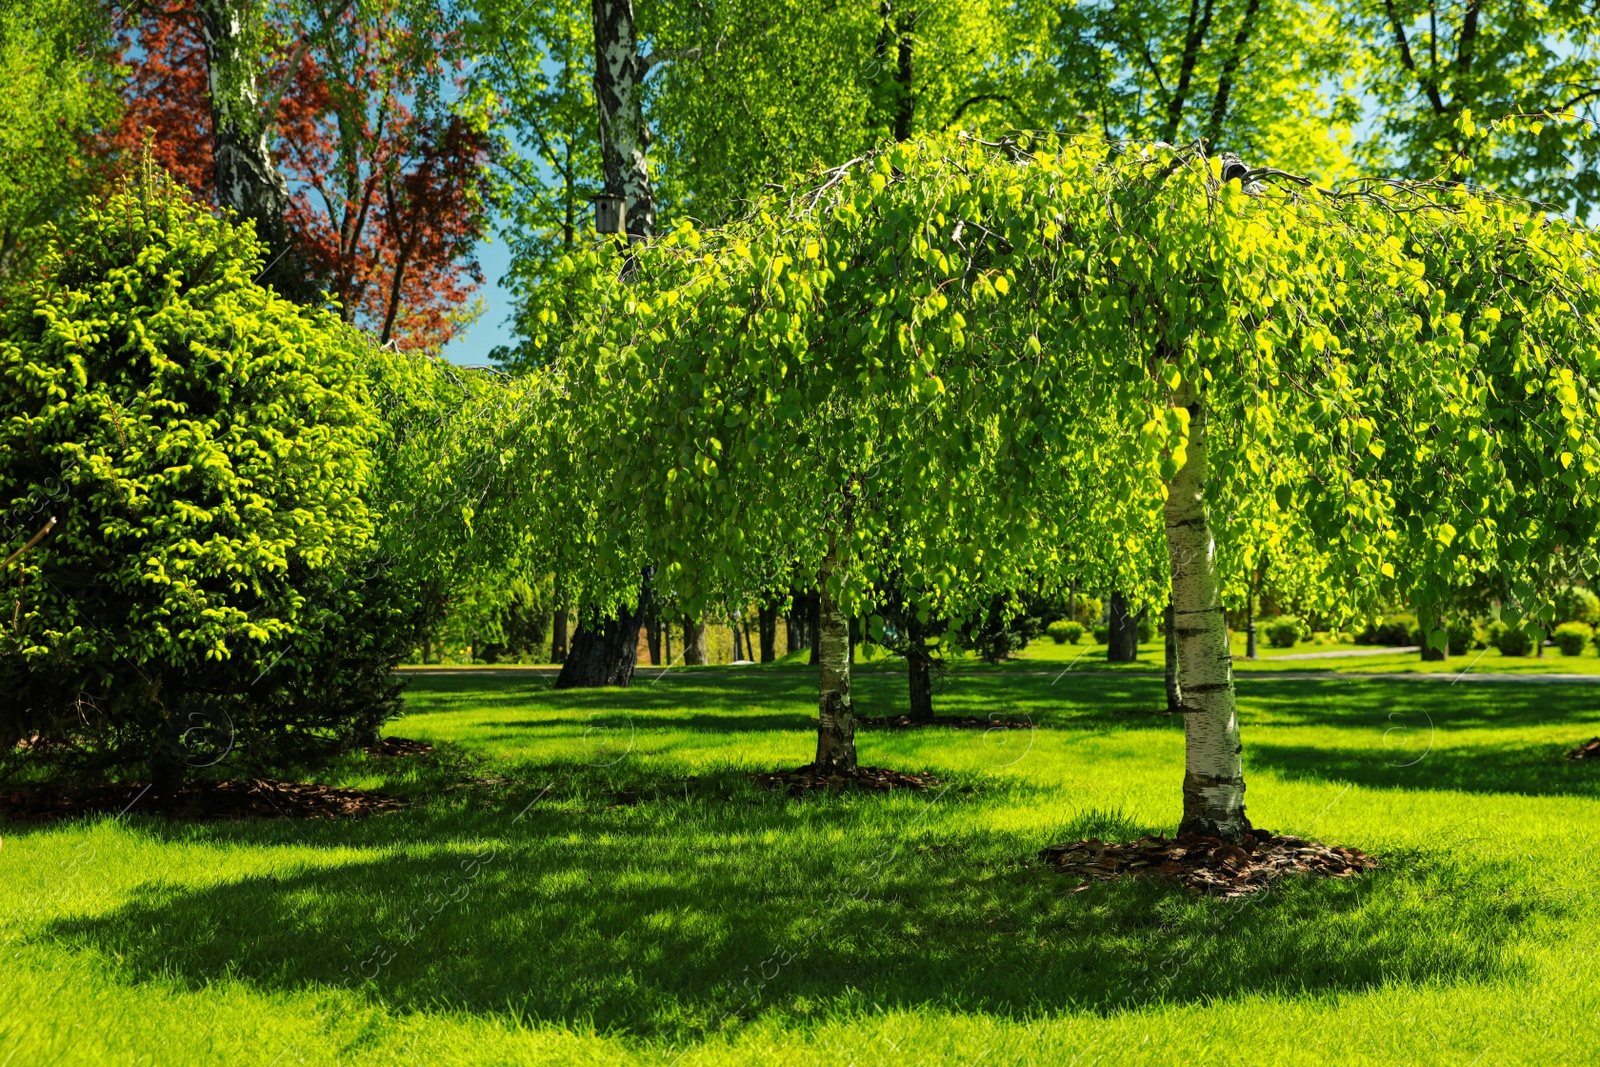 Photo of Beautiful trees with green leaves in park on sunny day